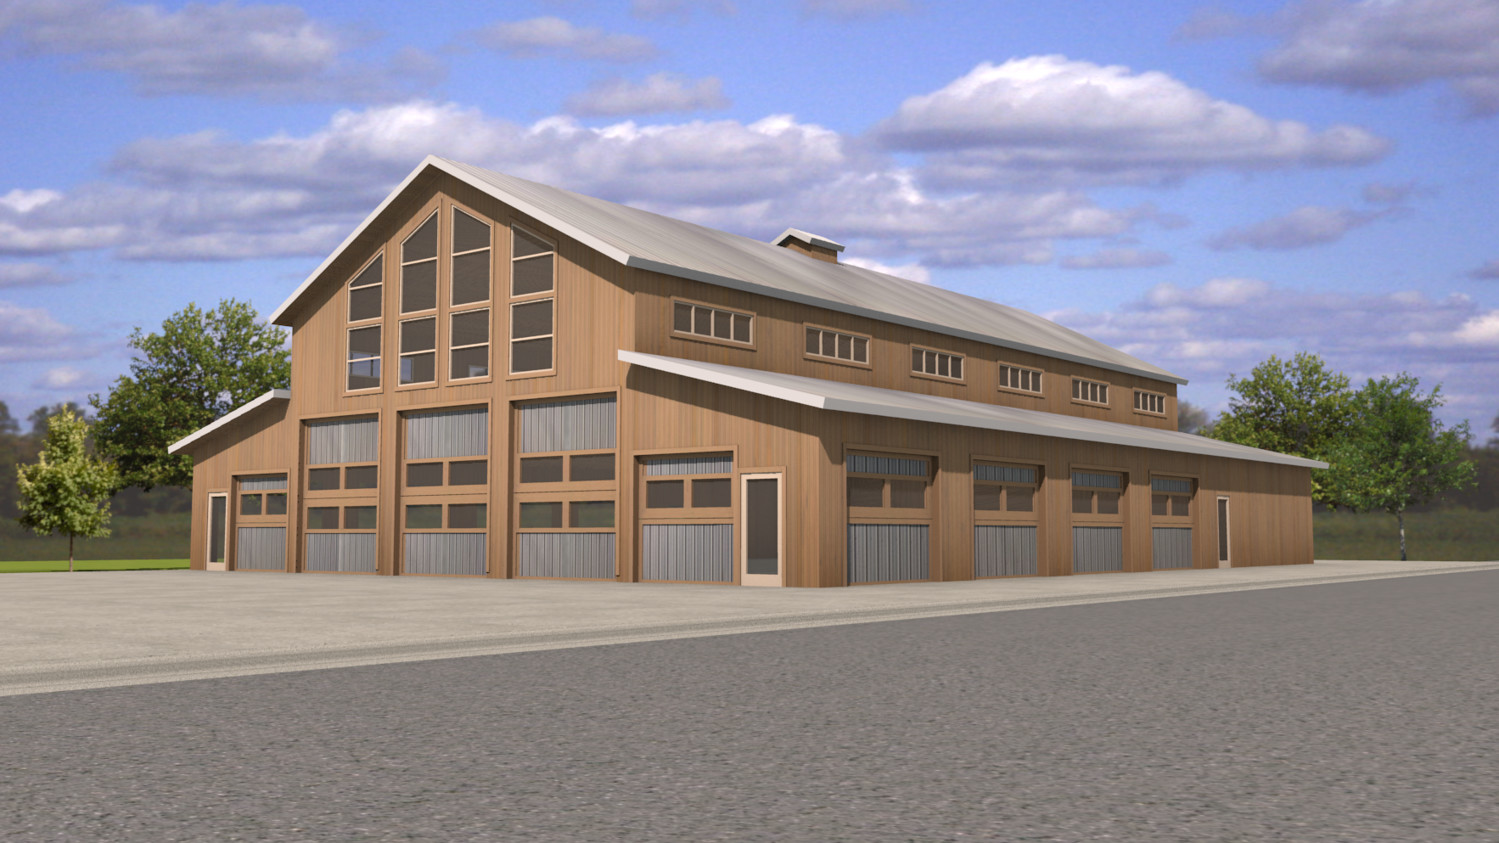 The finished event venue, featuring wood from Amish company Ozark Timber Frame, will resemble a barn.